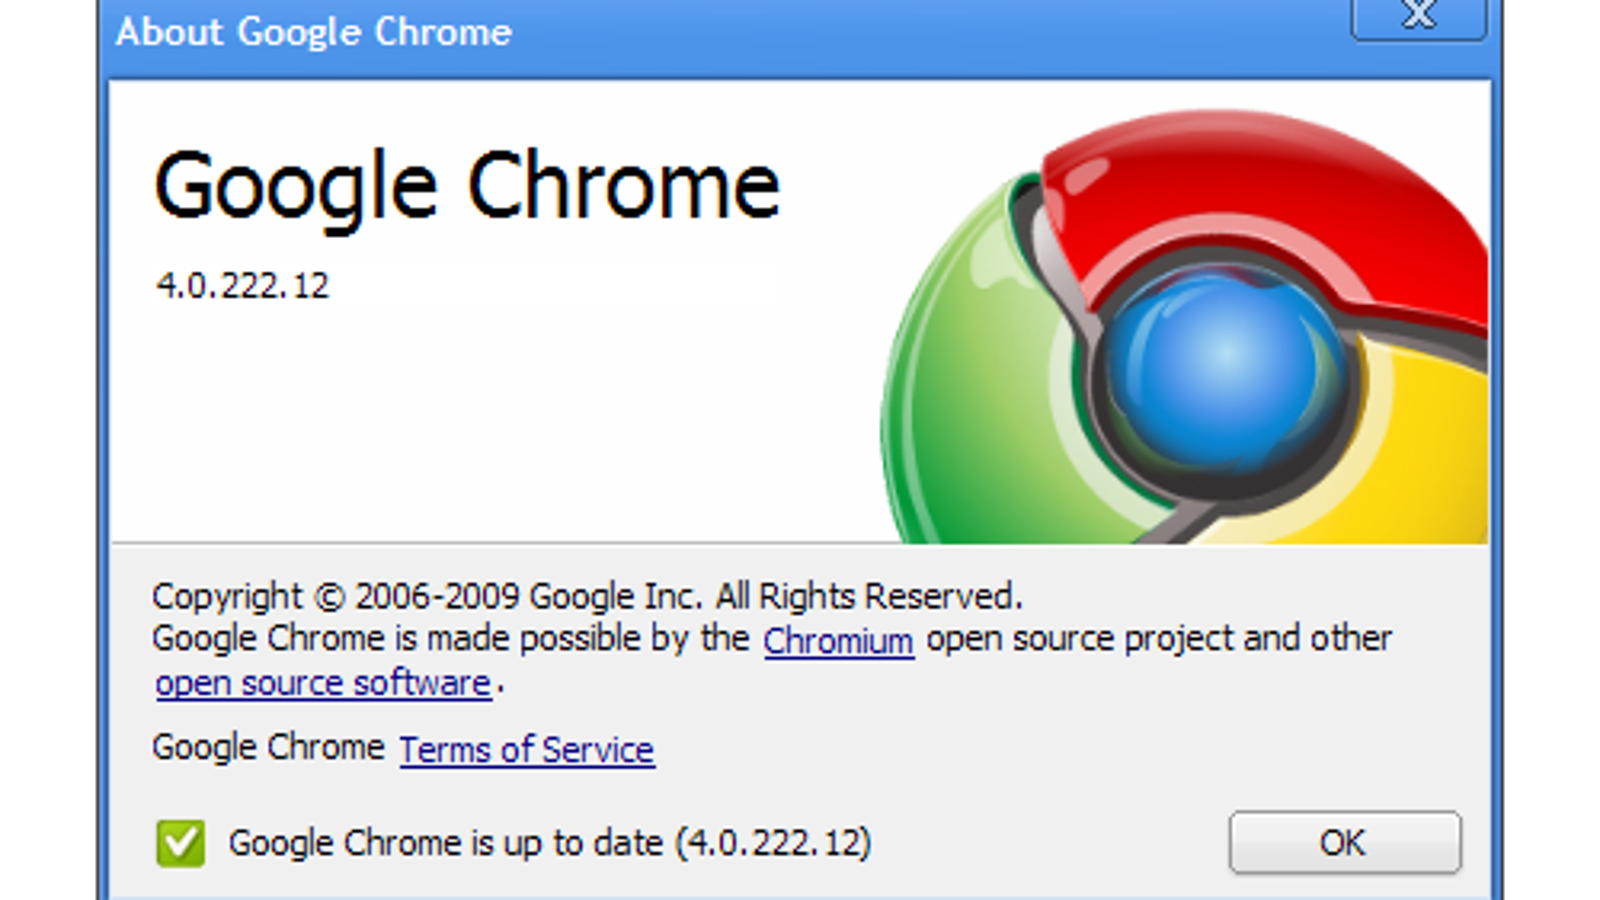 The Power User's Guide to Google Chrome, 2009 Edition